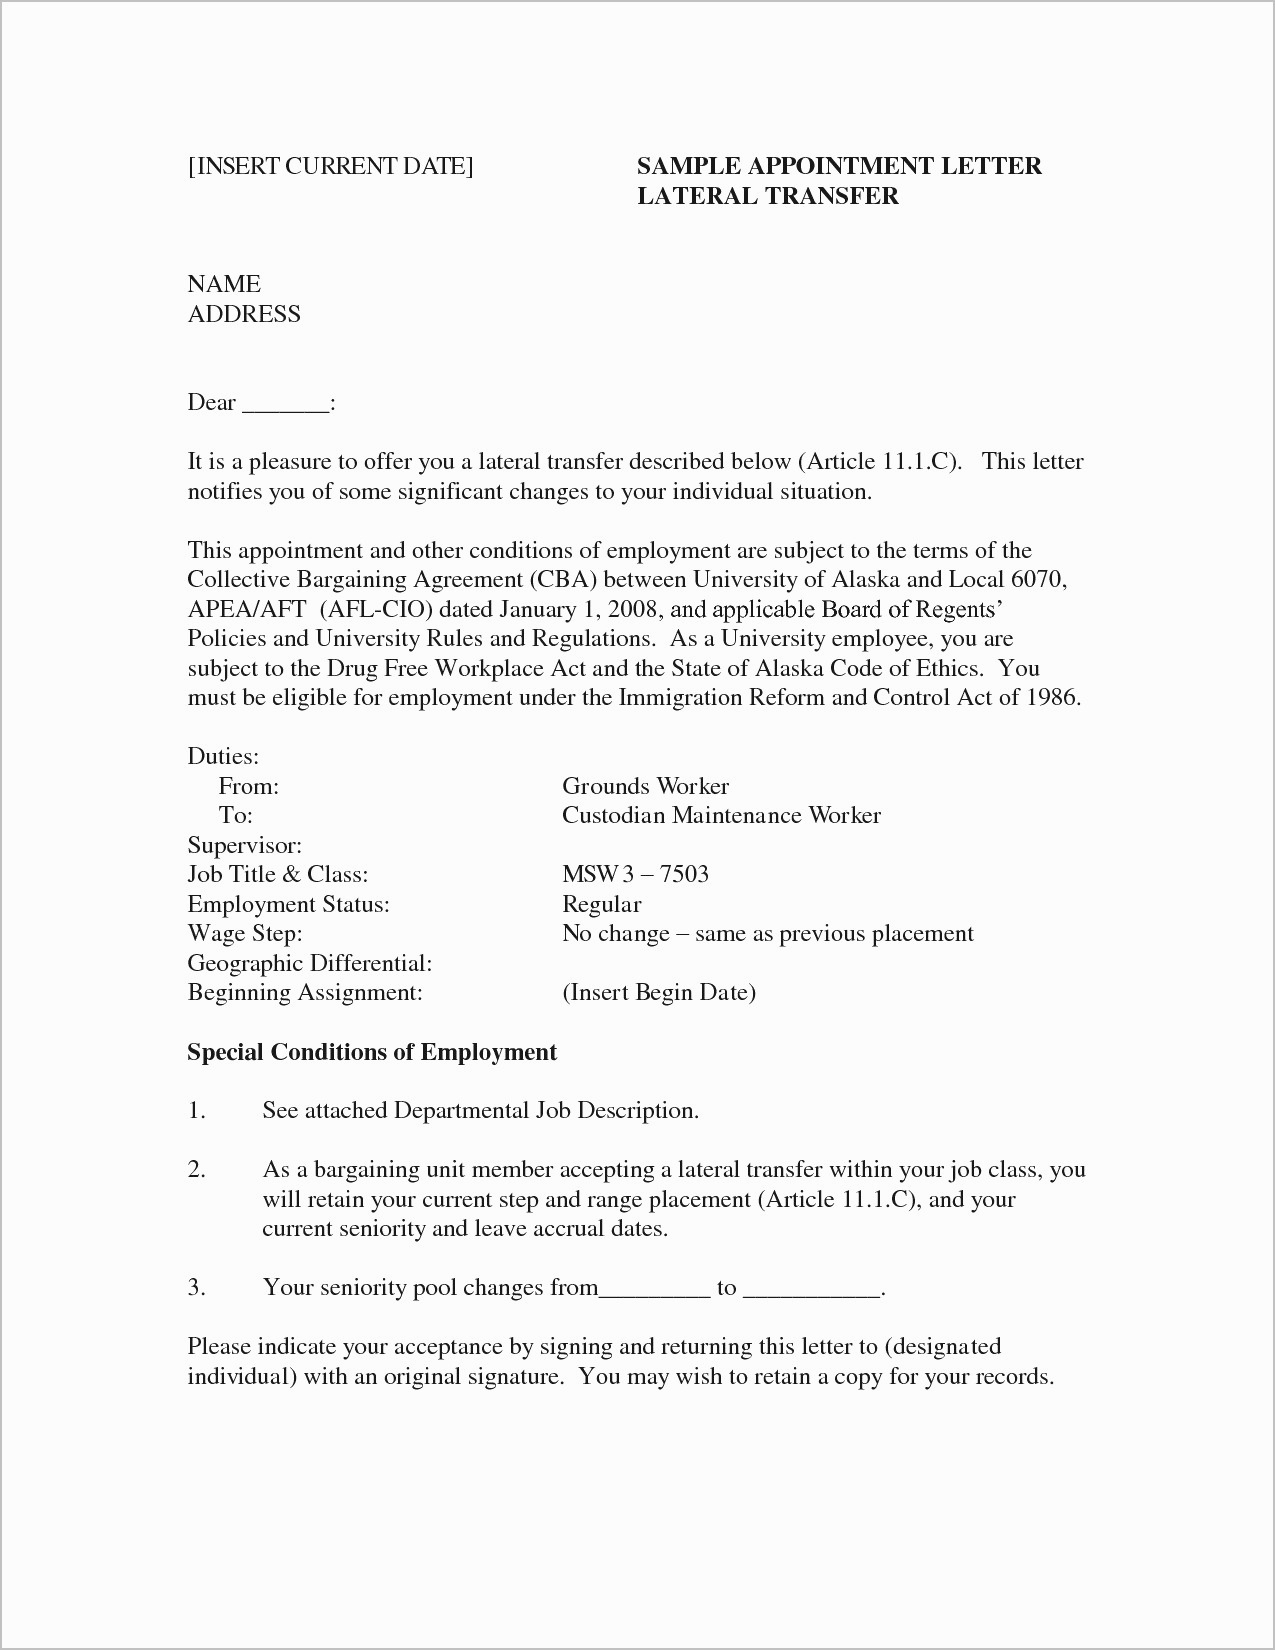 child support letter template Collection-Sample Child Support Letter Template New Job Fer Letter Template Us Copy Od Consultant Cover Letter 2-g